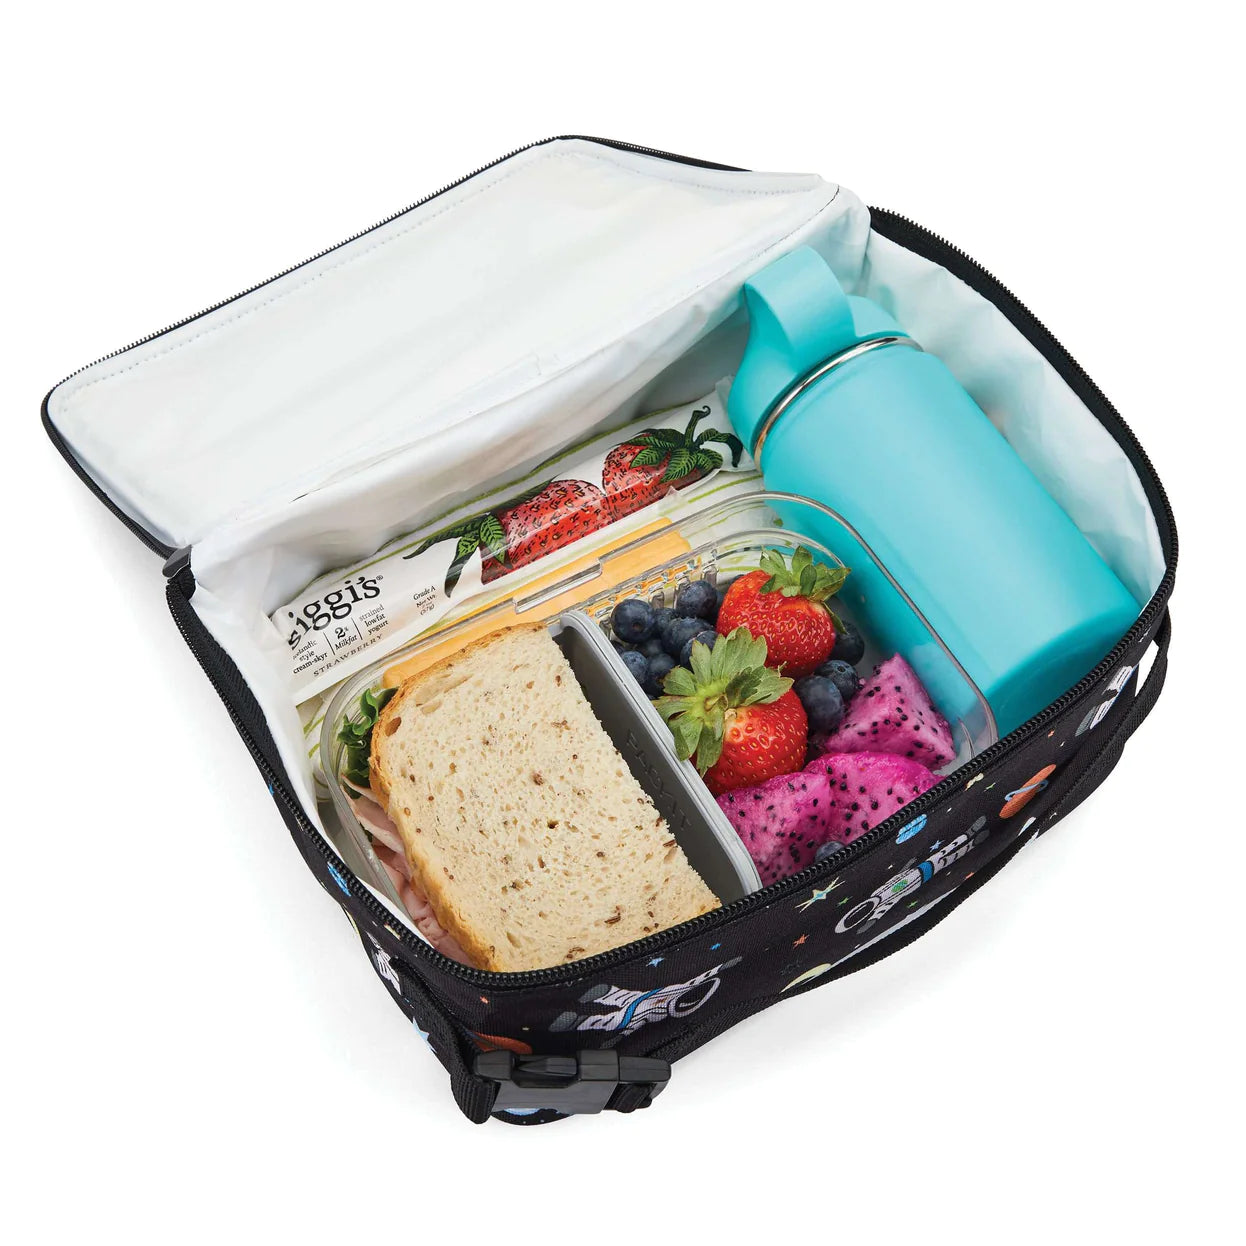 ERGO Packit Soft Sided Lunch Box | Available at The Green Collective